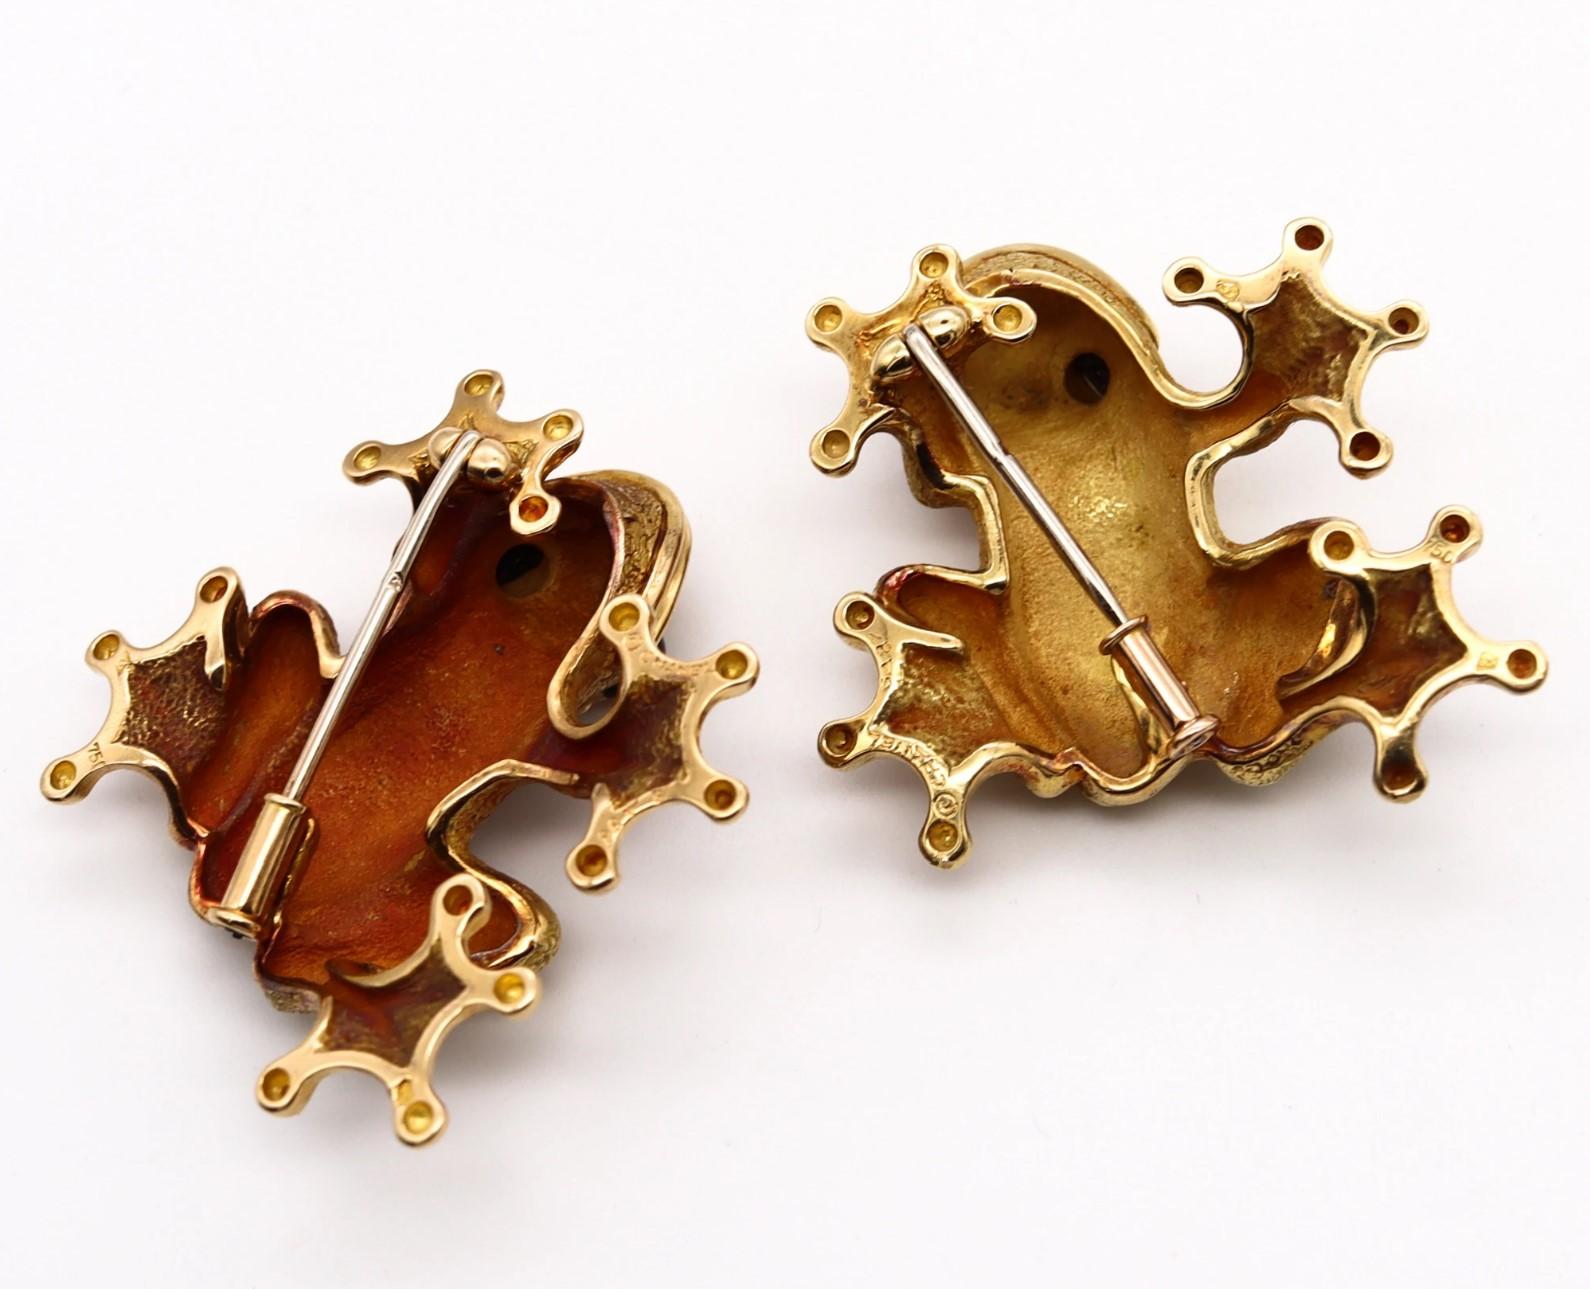 Modernist Chanel Paris 1970 Rare Vintage Suite of Frogs Brooches 18Kt Gold with Black Jade